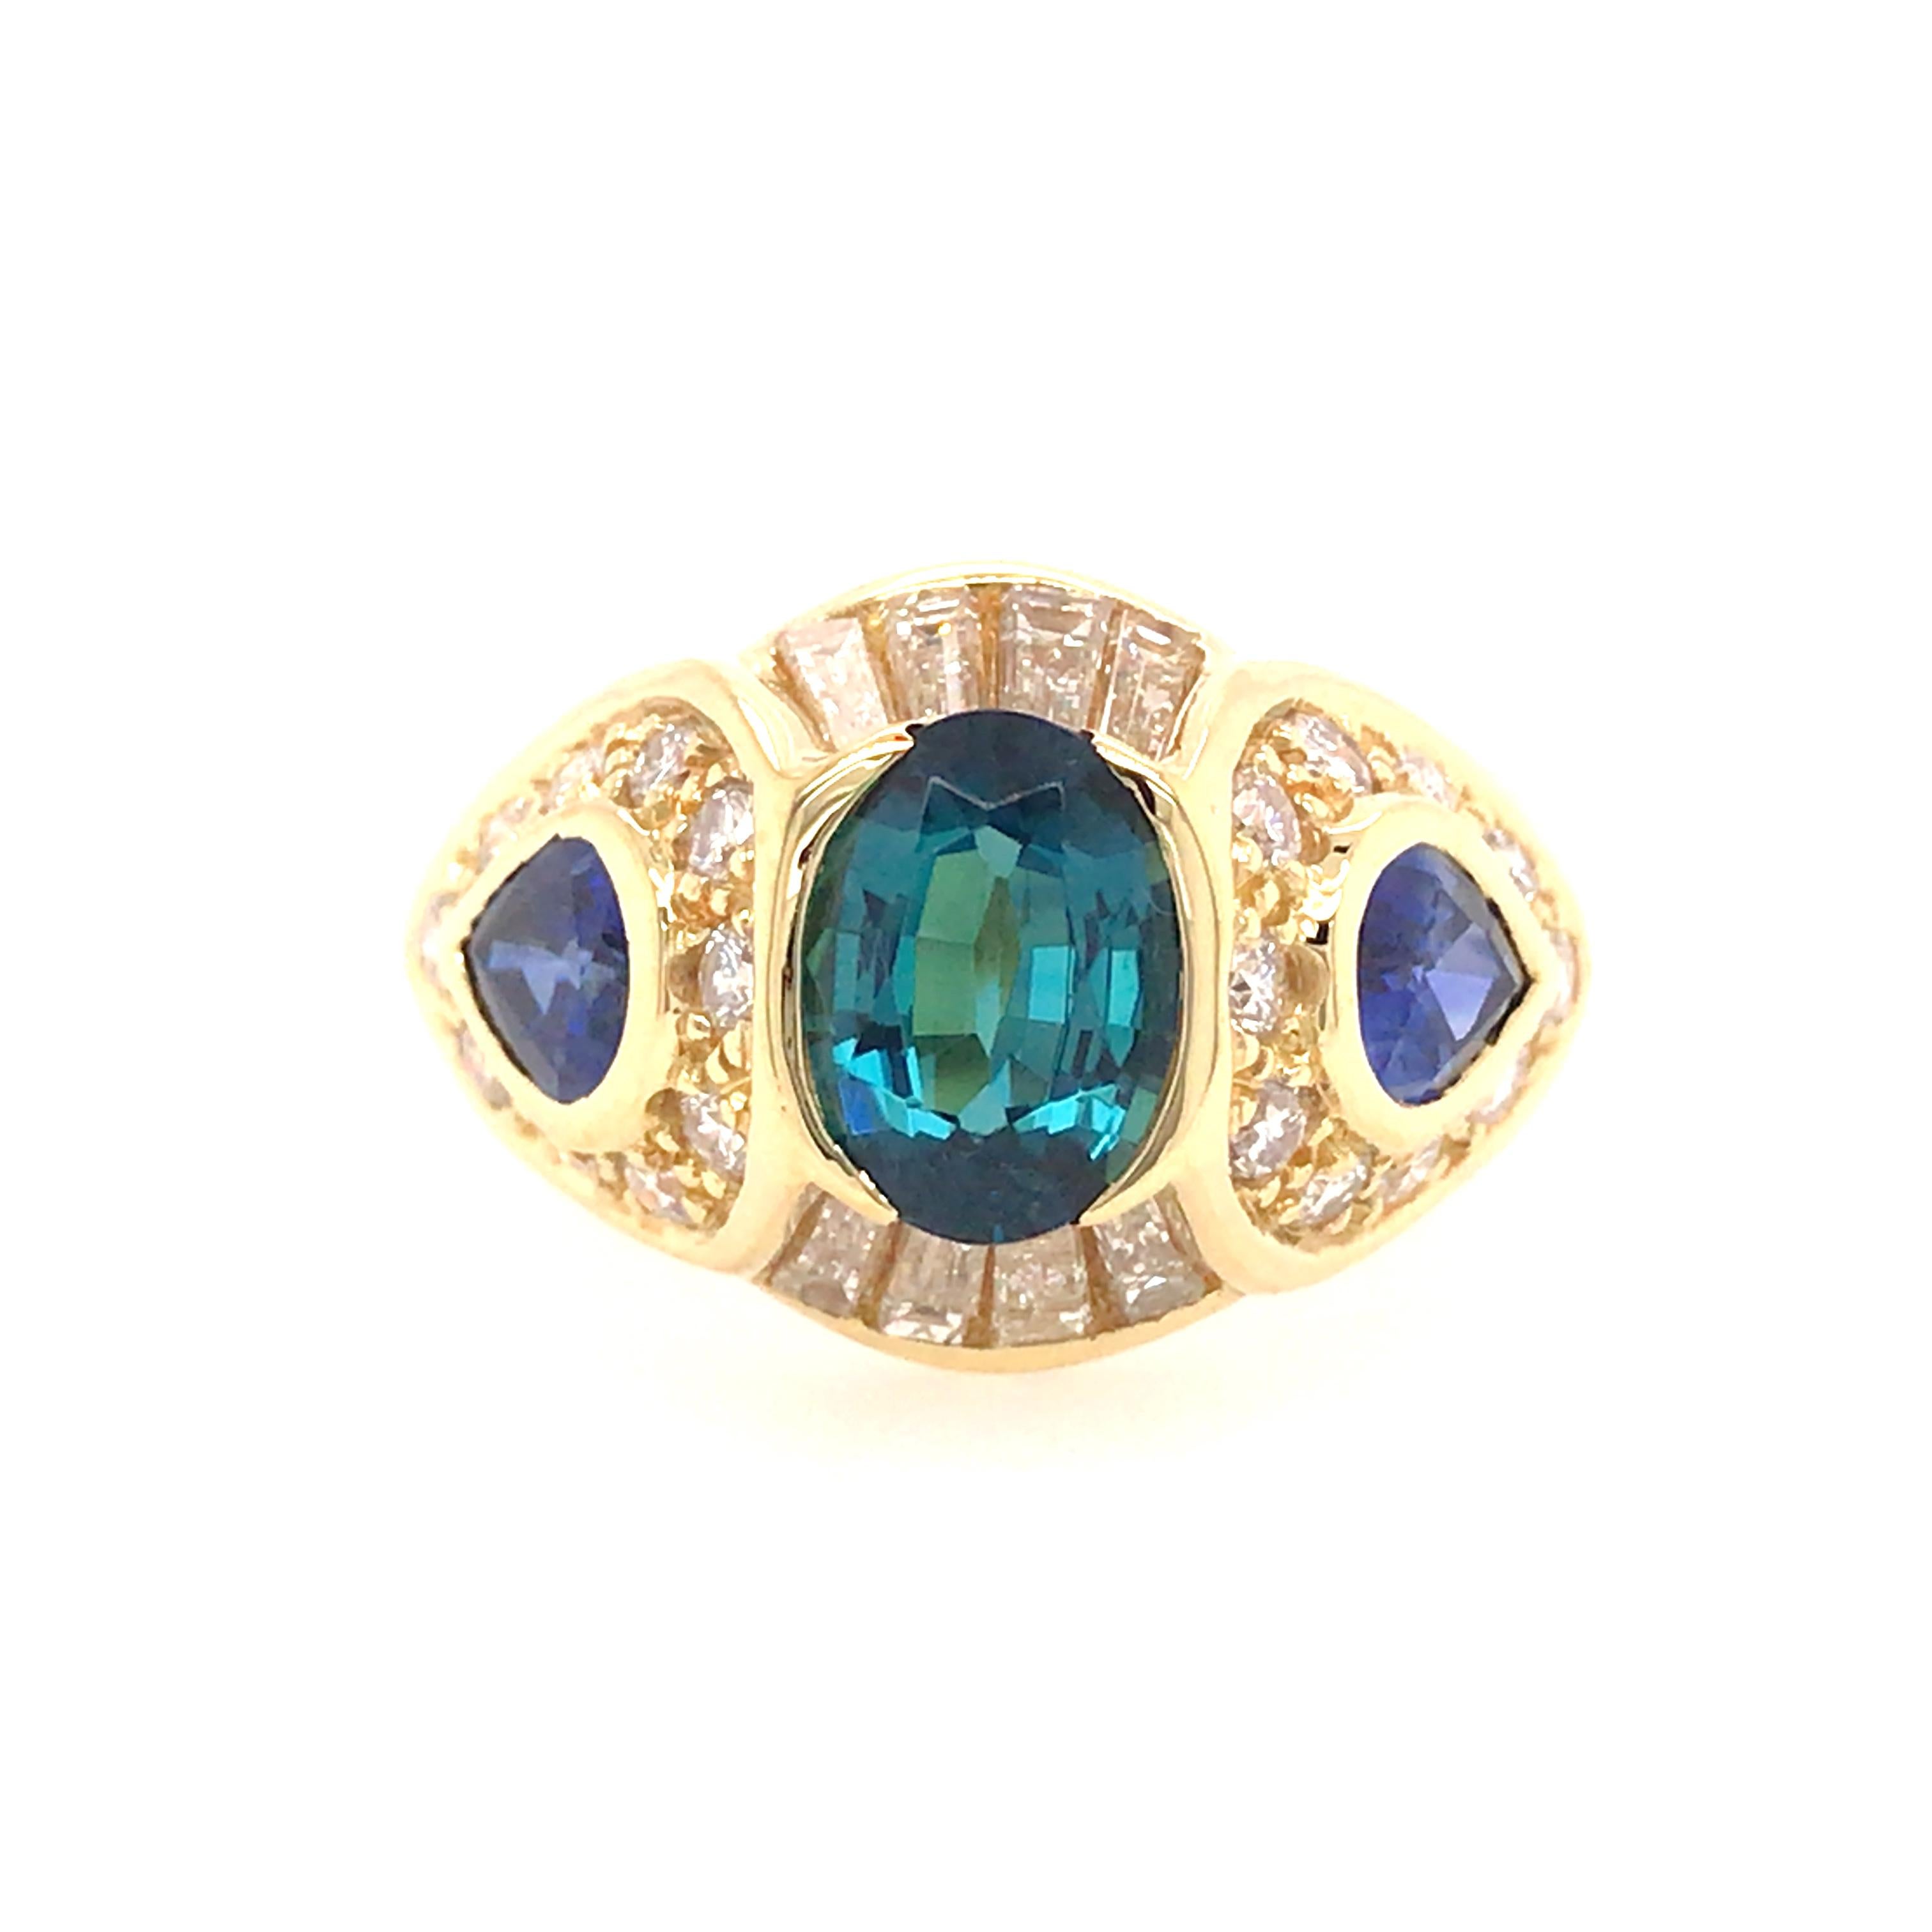 Sapphire and Diamond Ring in 18K Yellow Gold.  Baguette and Round Brilliant Cut Diamonds weighing 1.04 carat total weight, G-H in color and VS in clarity and (3) Sapphires weighing 2.50 carat total weight, including 1.30 carat center are expertly